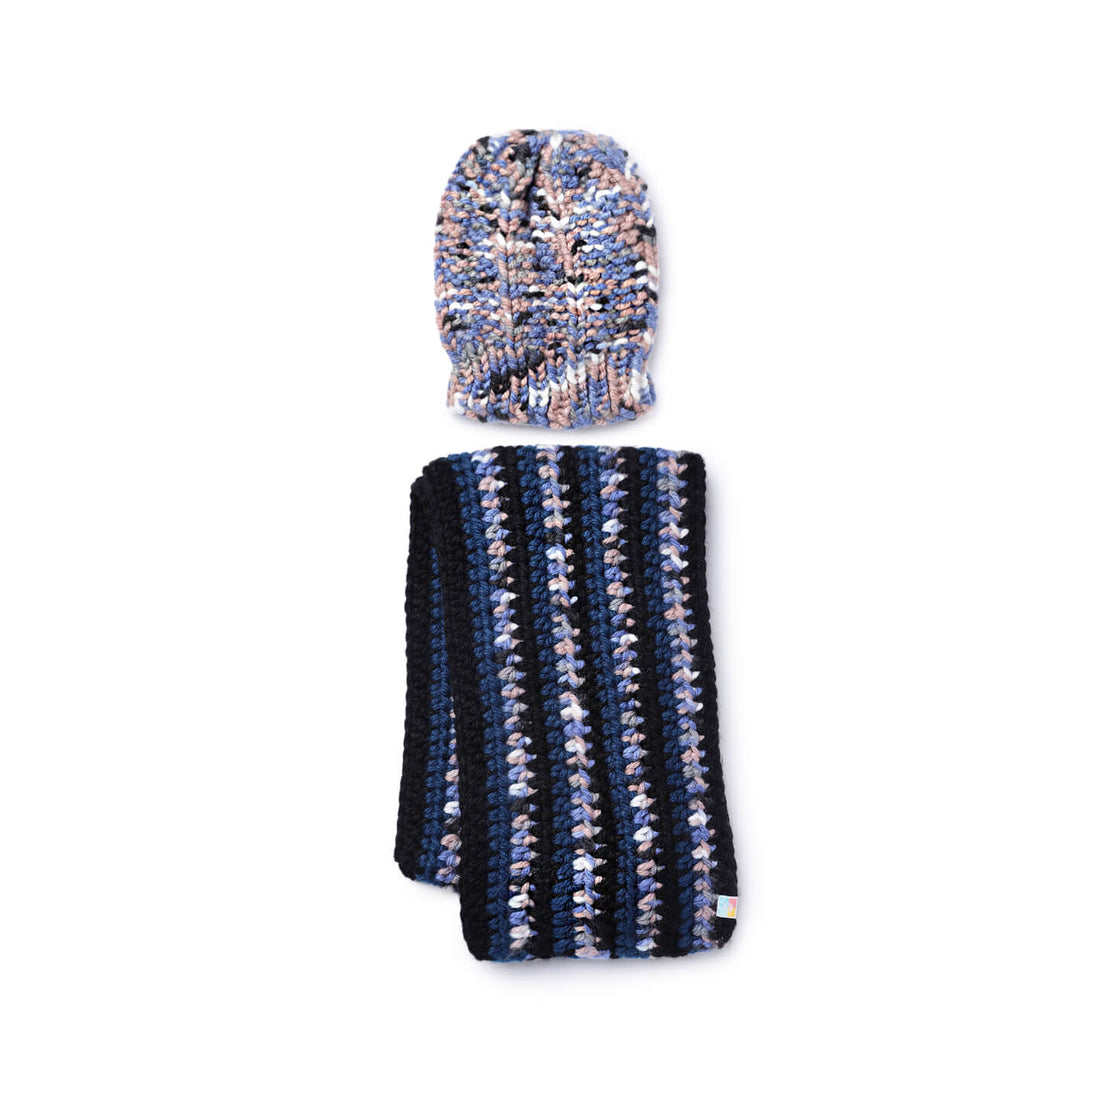 Beanie and Scarf Coordinating Set - 3194